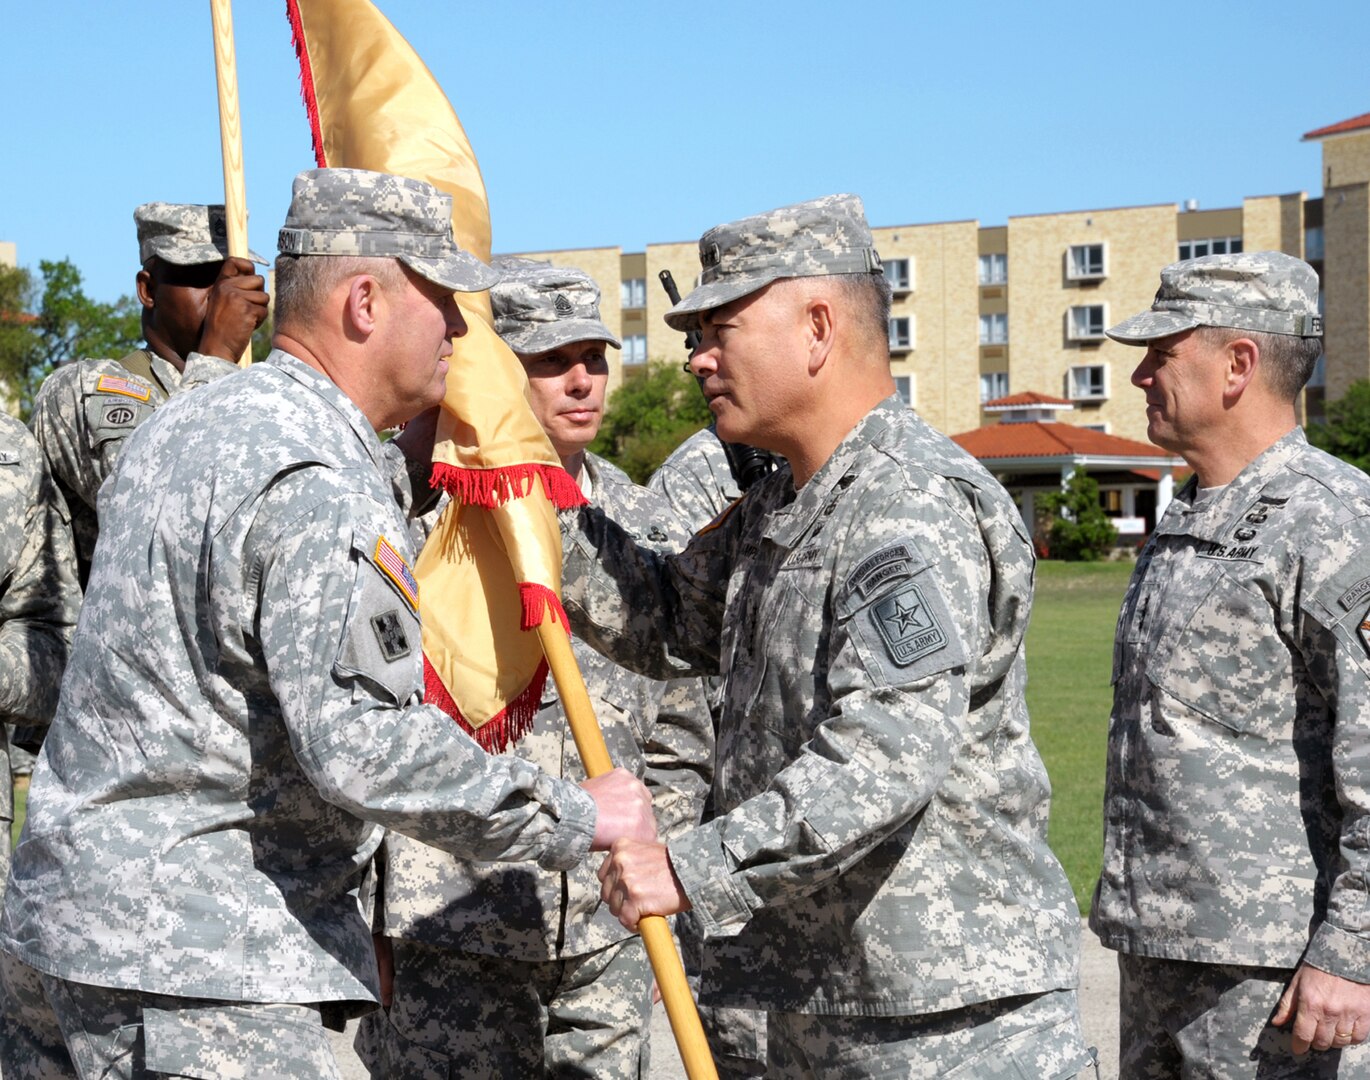 Army Lt. Gen. David D. Halverson (left) accepts the colors from Army Gen. John F. Campbell (center), Vice Chief of Staff of the Army, and assumes duties as commanding general of the U.S. Army Installation Management Command and Assistant Chief of Staff for Installation Management as outgoing IMCOM commander Lt. Gen. Mike Ferriter (right) looks on during a change of command ceremony at Joint Base San Antonio-Fort Sam Houston’s MacArthur Parade Field Tuesday. Halverson served as deputy commanding general for the Army Training and Doctrine Command at Fort Eustis, Va., before this assignment. An article and additional photos from the change of command will appear in the April 18 edition of the News Leader.

Photo by Joel Martinez